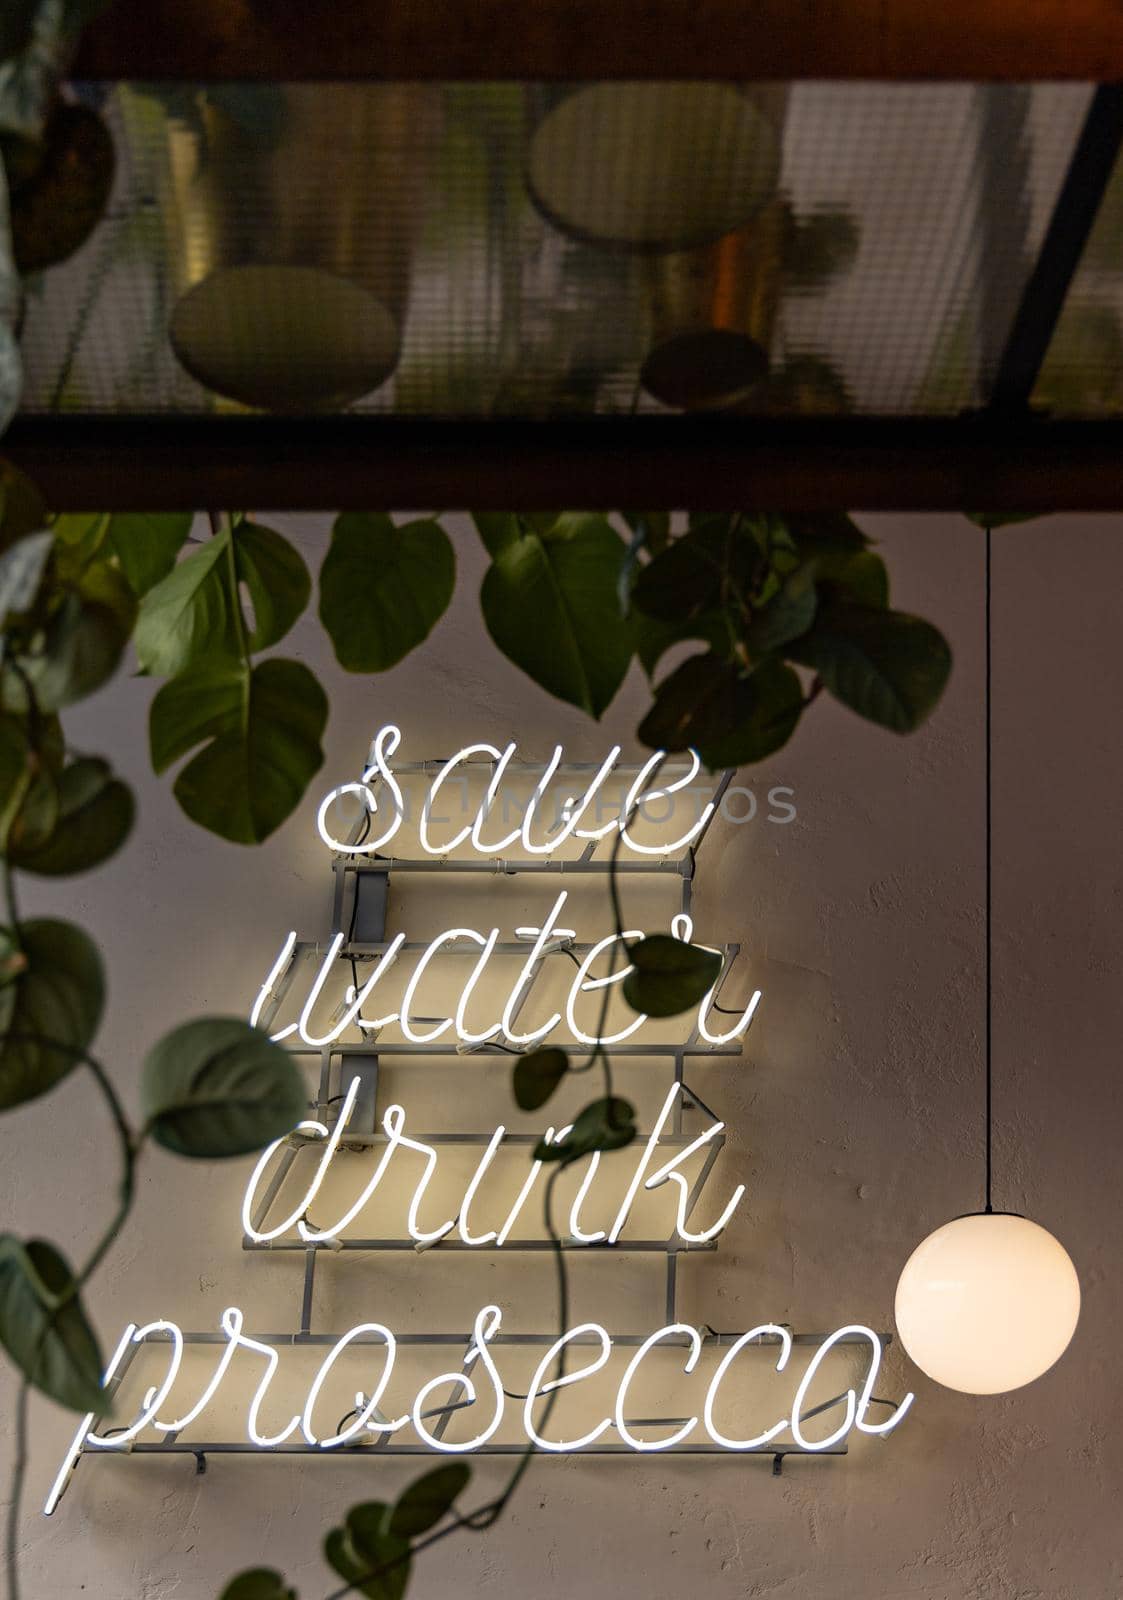 Glowing light neon "save water drink prosecco" hanged on wall with flowers and plants around